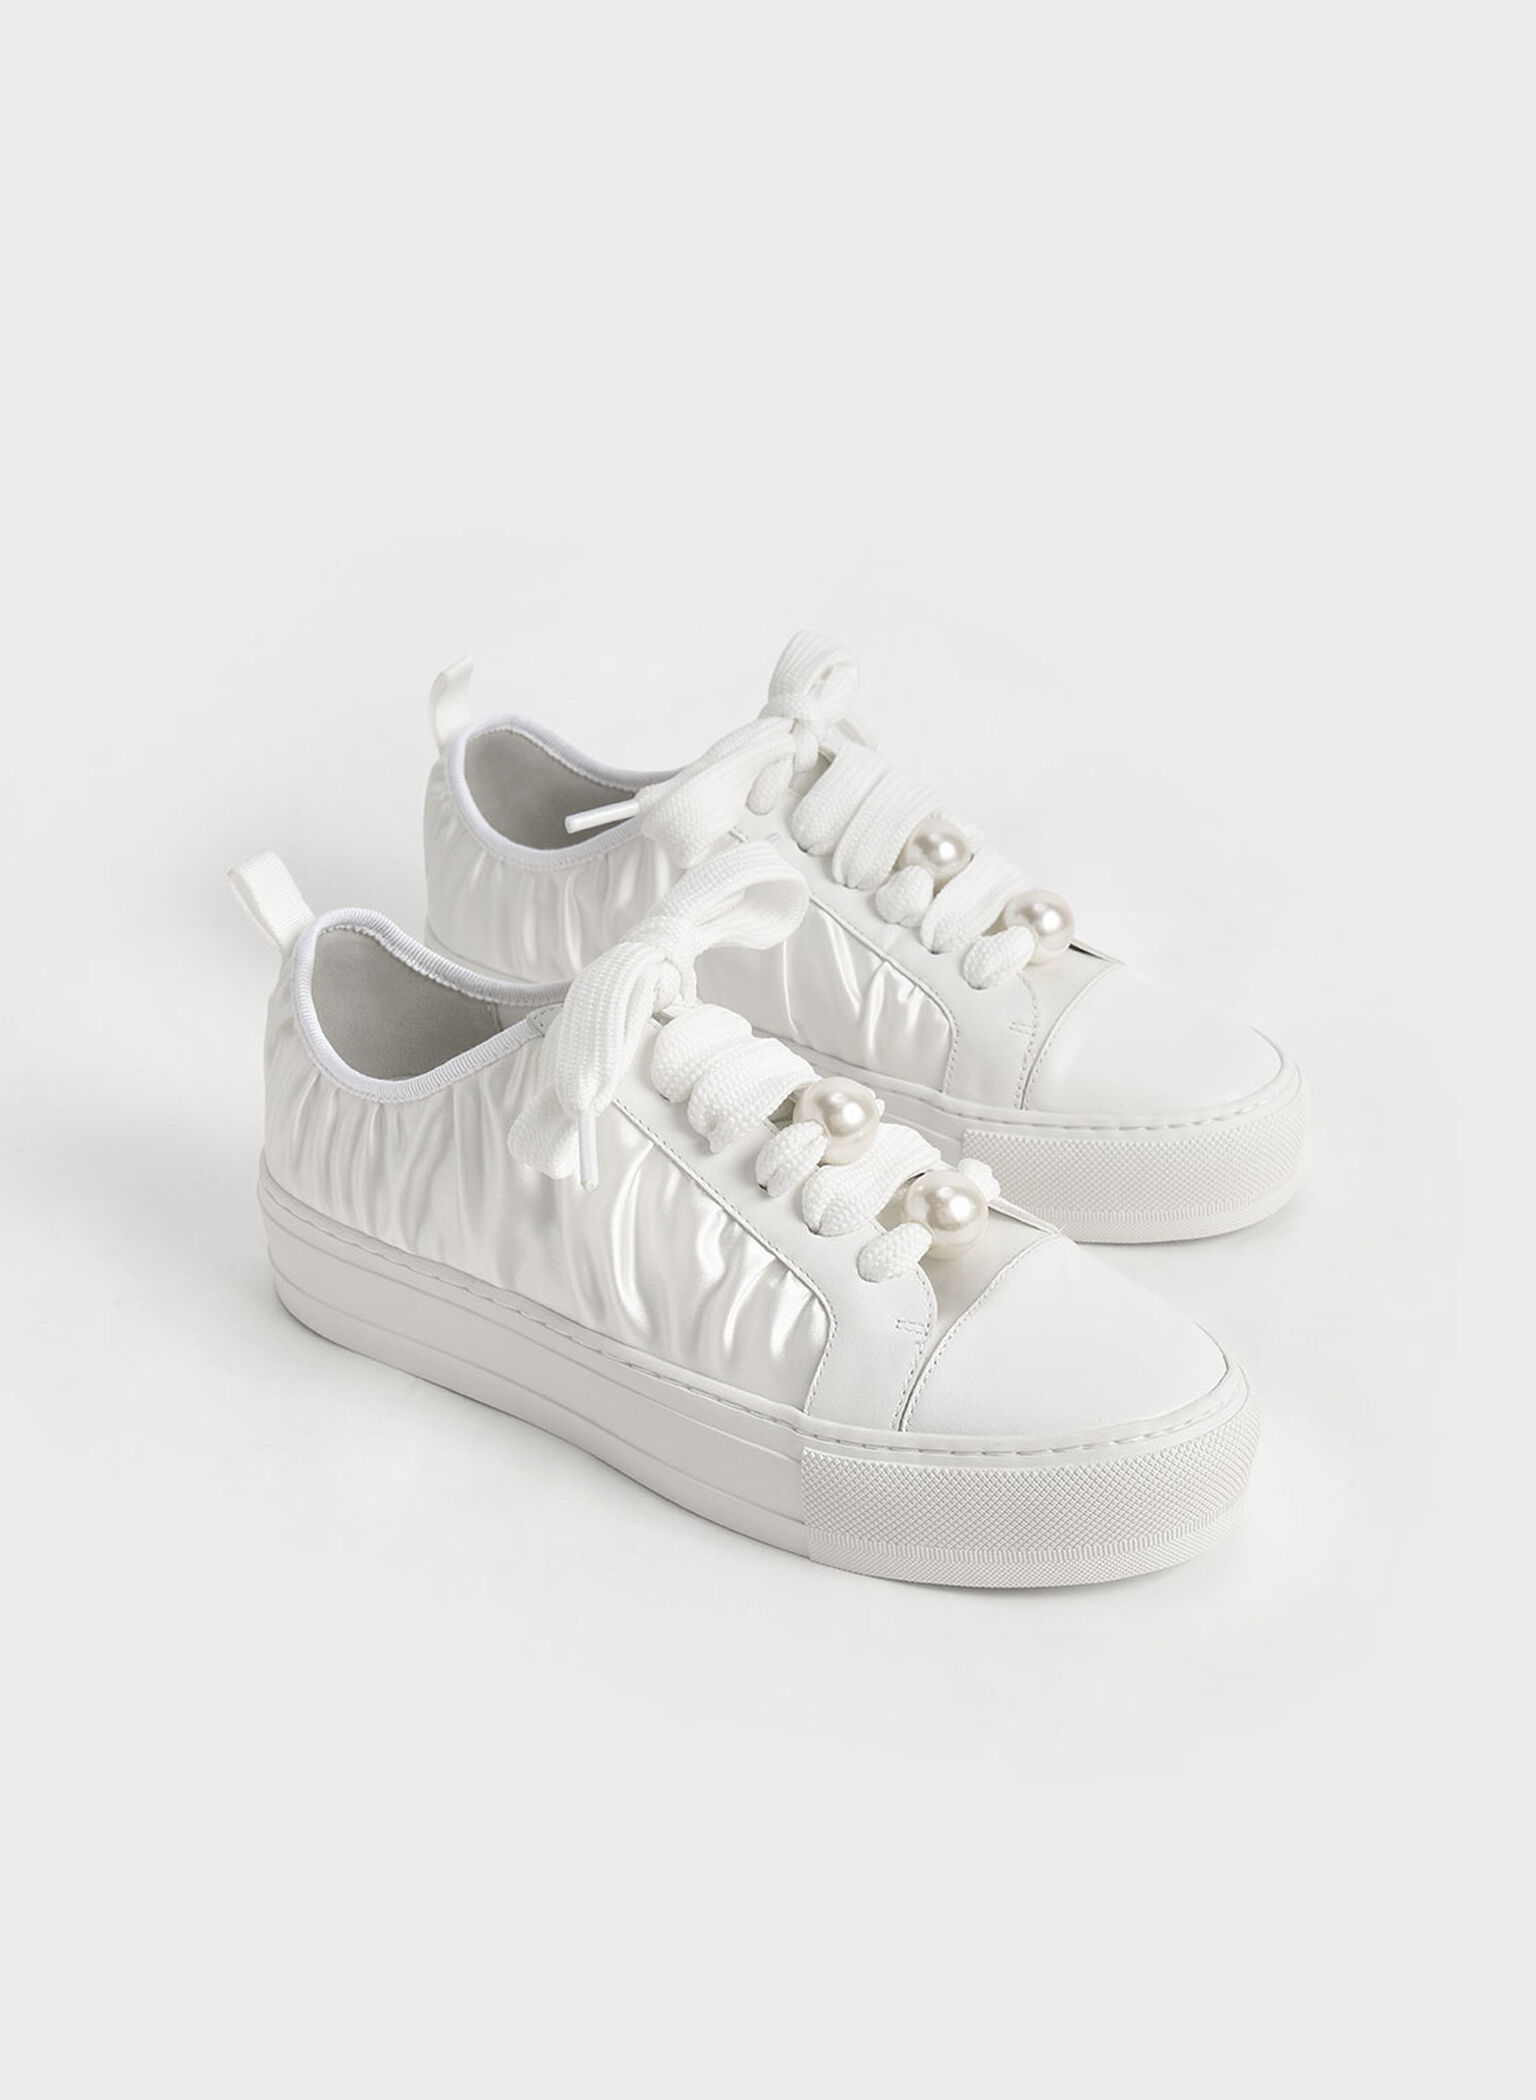 Blythe Leather & Satin Bead-Embellished Sneakers, White, hi-res